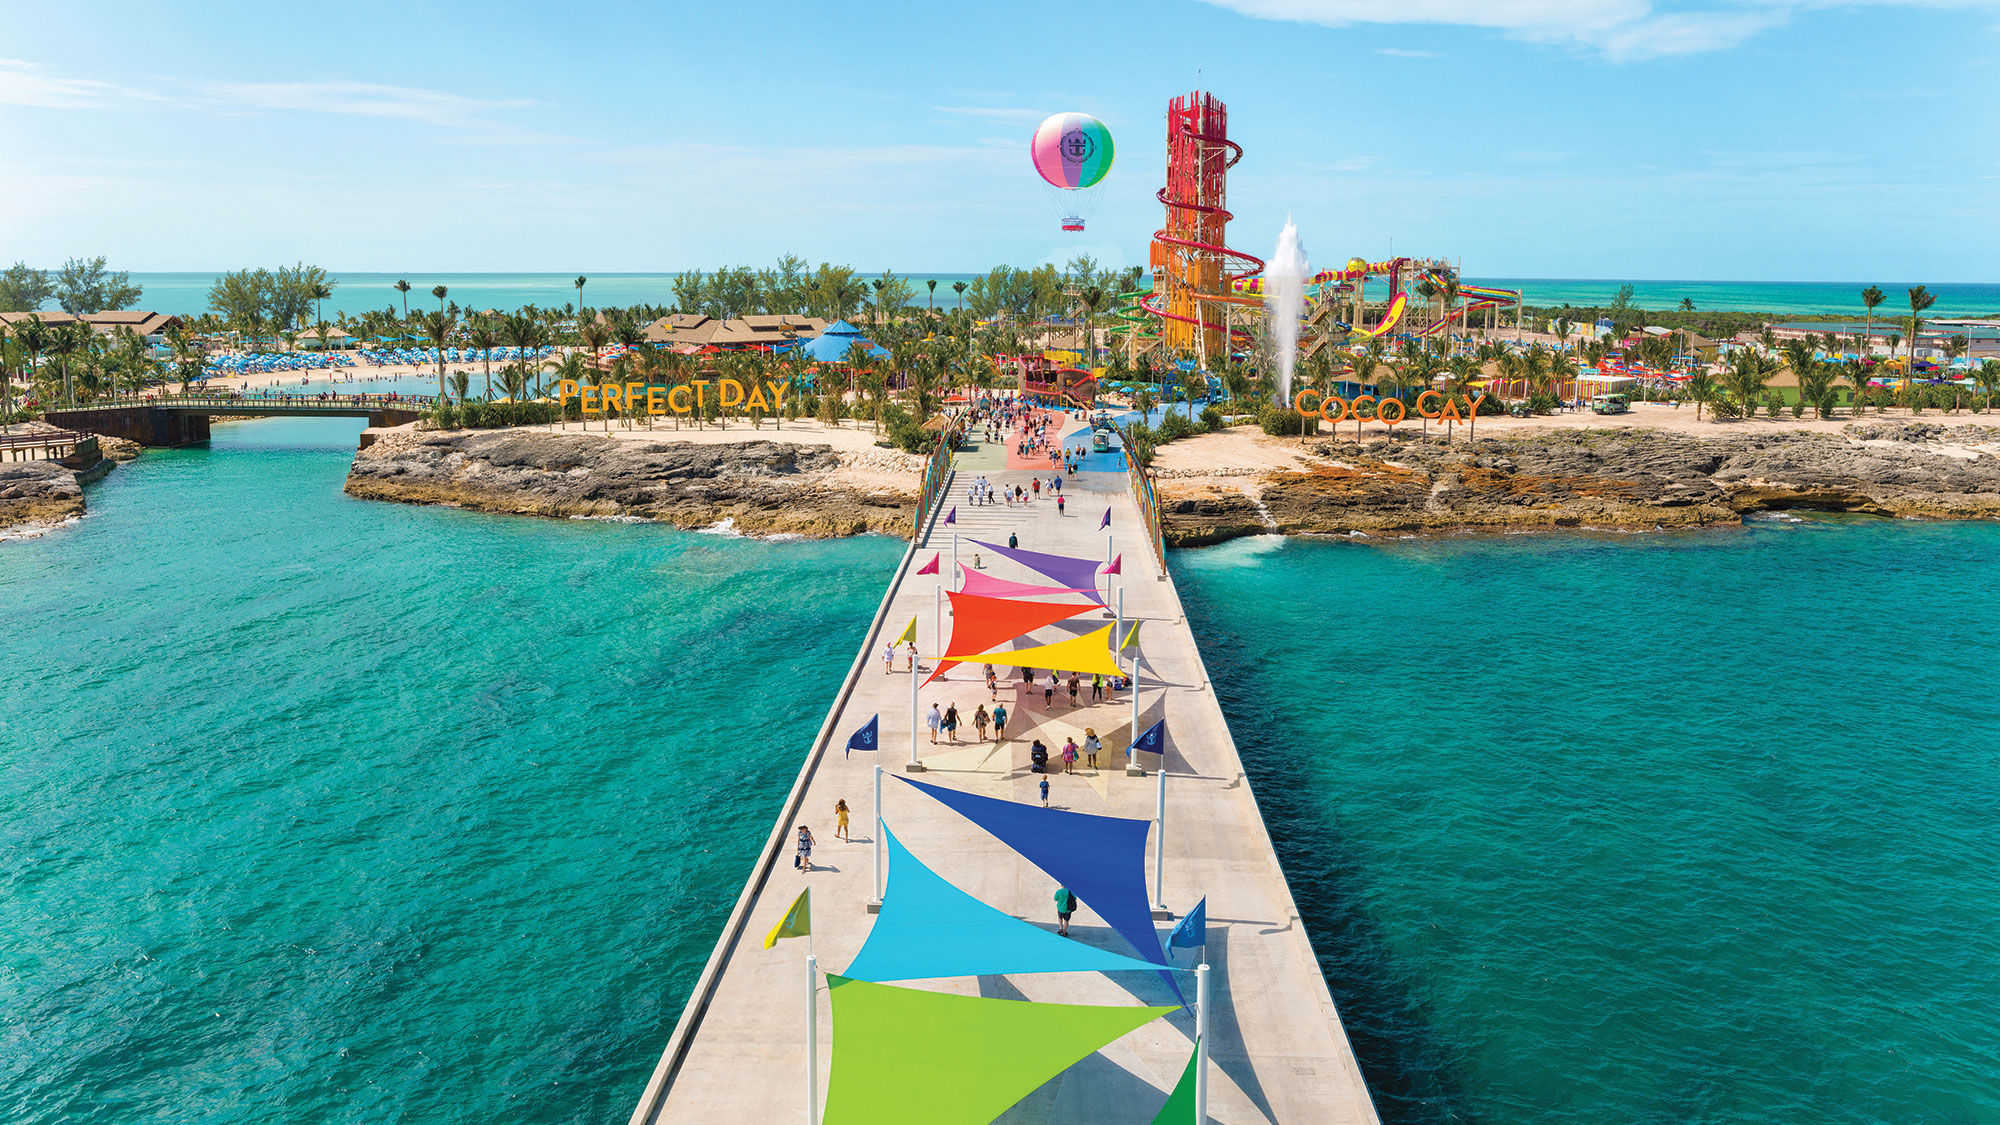 The Celebrity Reflection and Celebrity Beyond will call at Royal Caribbean's Perfect Day at CocoCay in 2024.